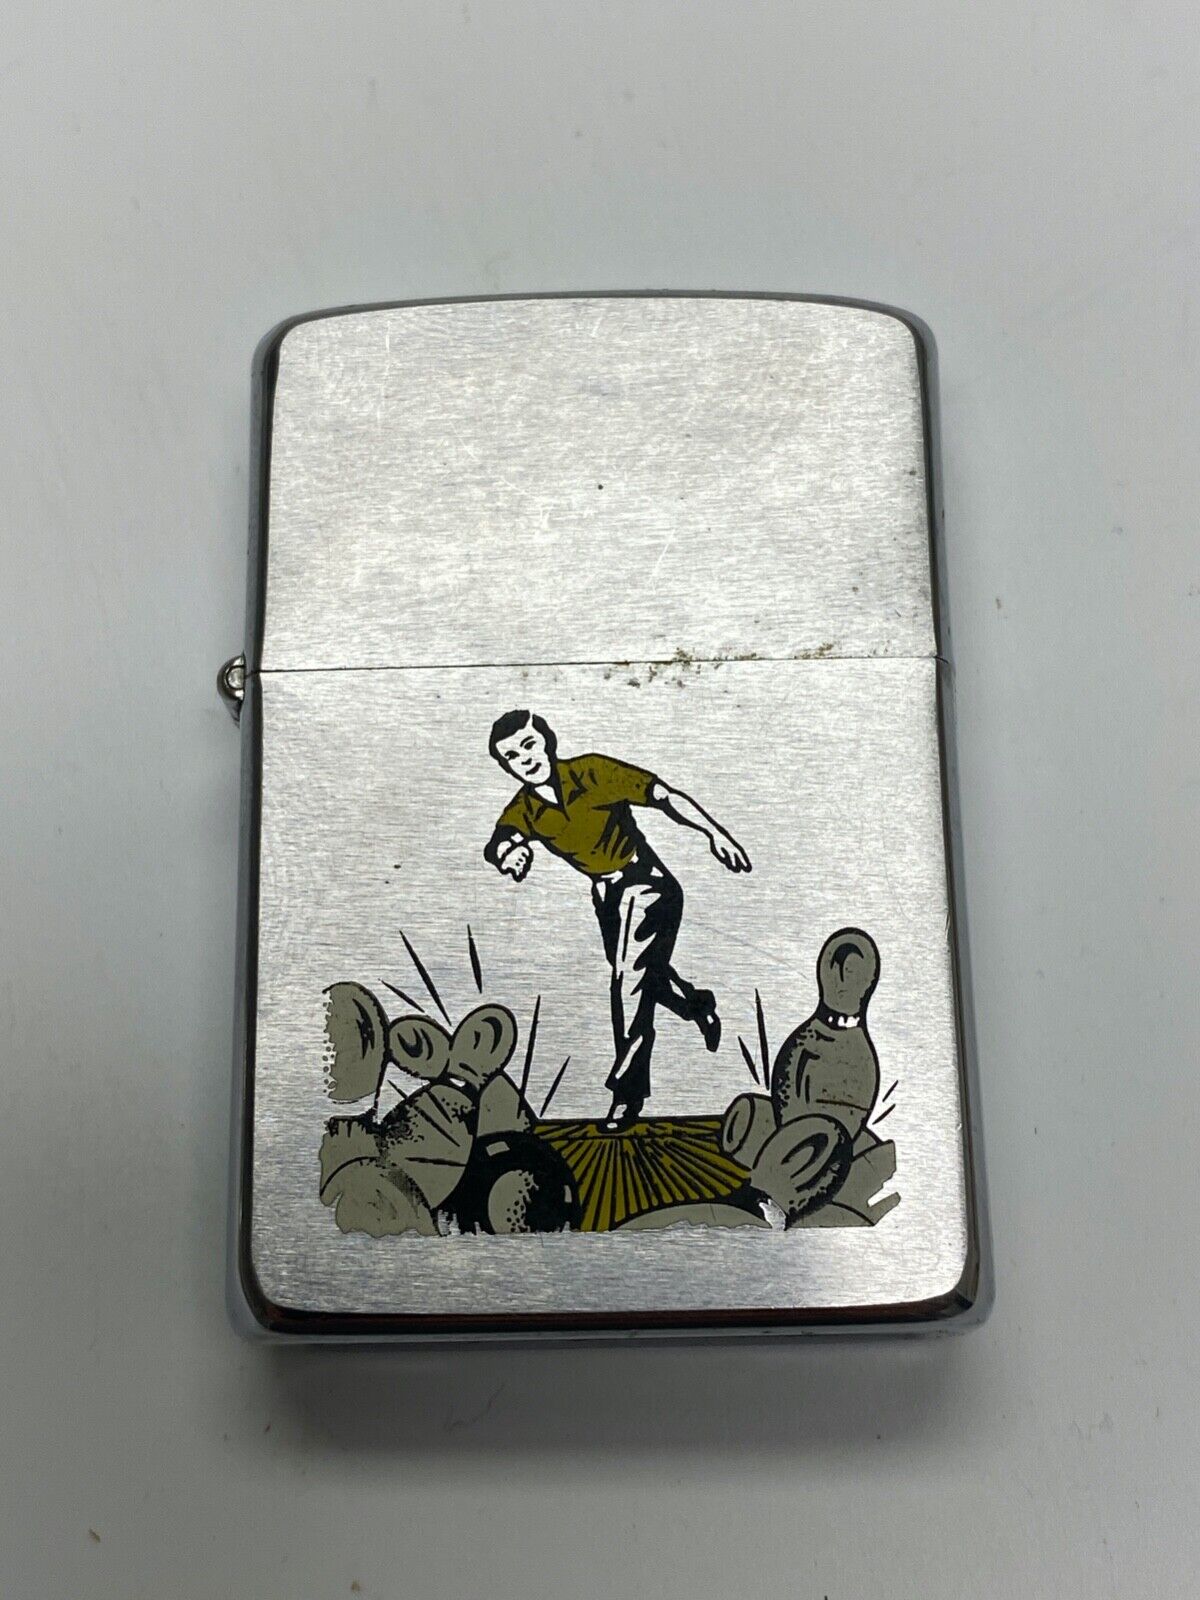 1981 Vintage Zippo Lighter - Bowler - Bowling - Sports Series - Brushed Chrome